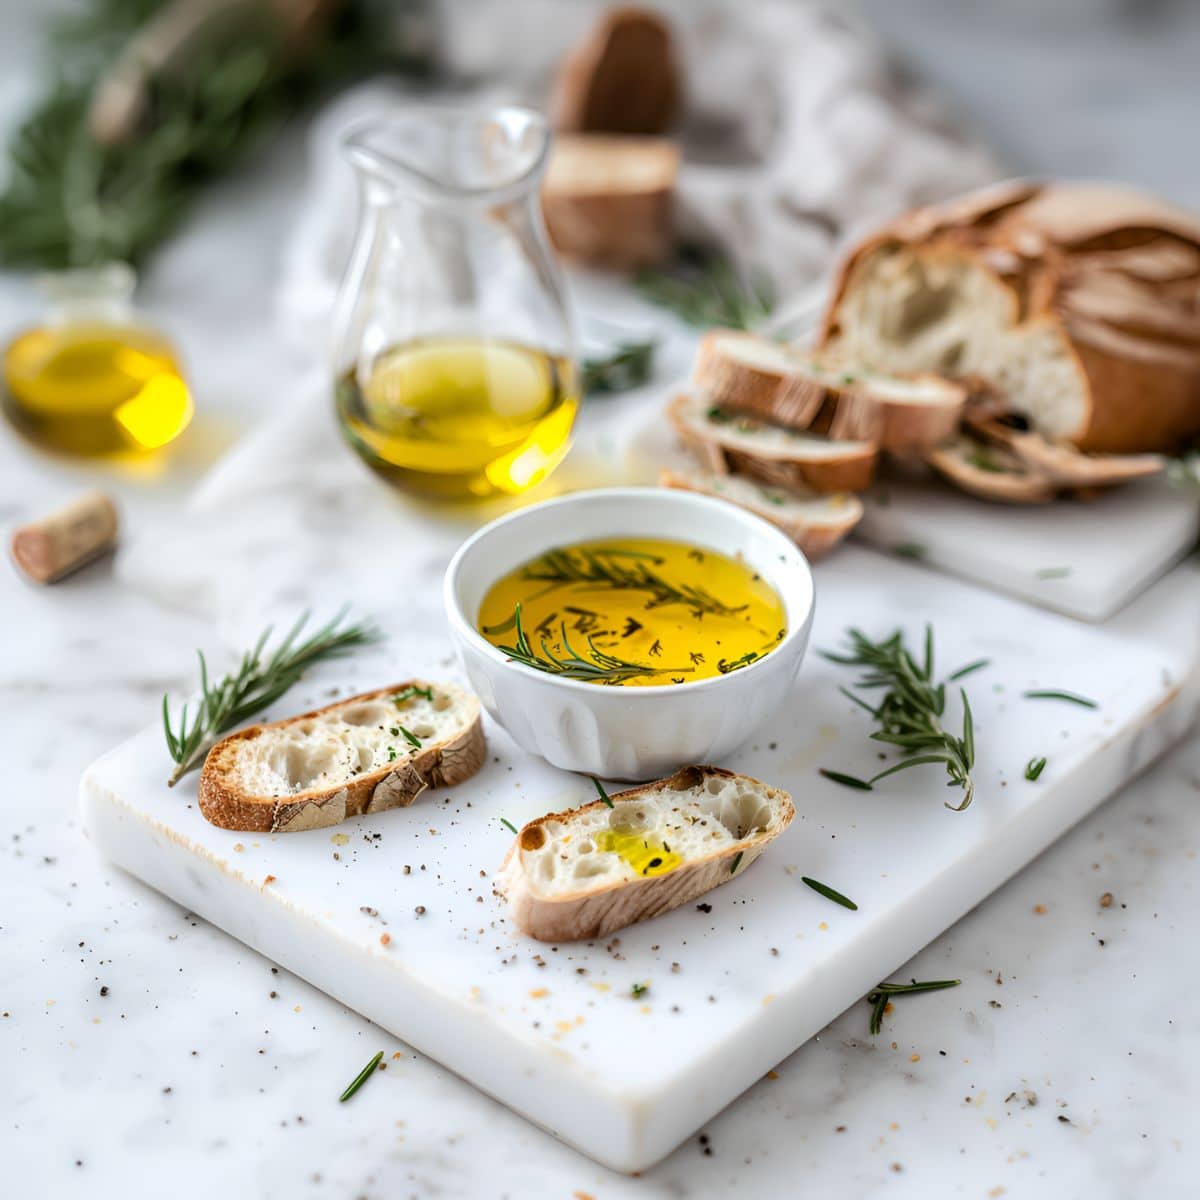 Carrabba's Bread Dip in a White Bowl with Seasonings and Rosemary on a White Cutting Board with Crusty Bread on a White Marble Table with More Bread in the Background